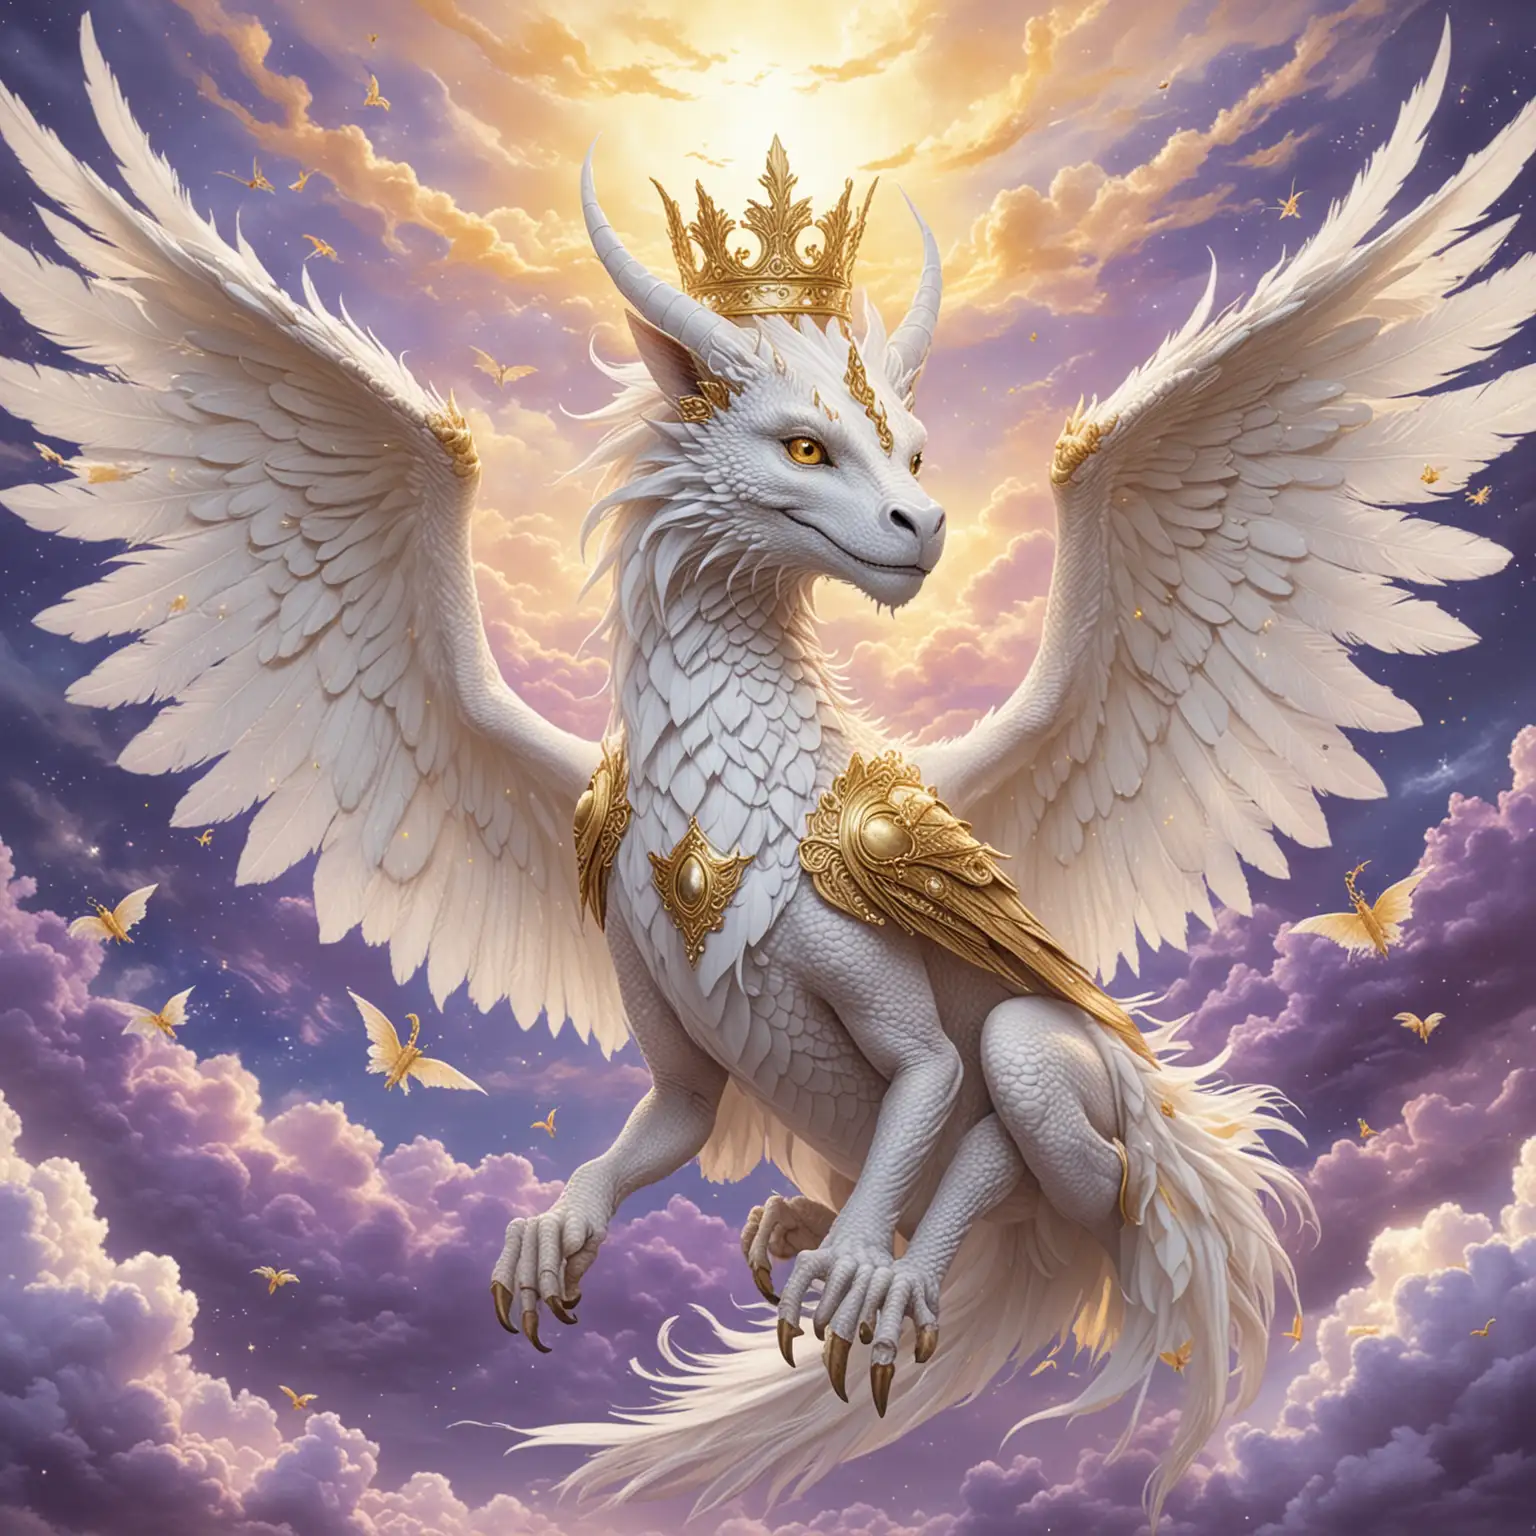 white seraphim female dragon, gold crown on head, feather like wings, flying in a celestial sky of white, yellow, lavendar